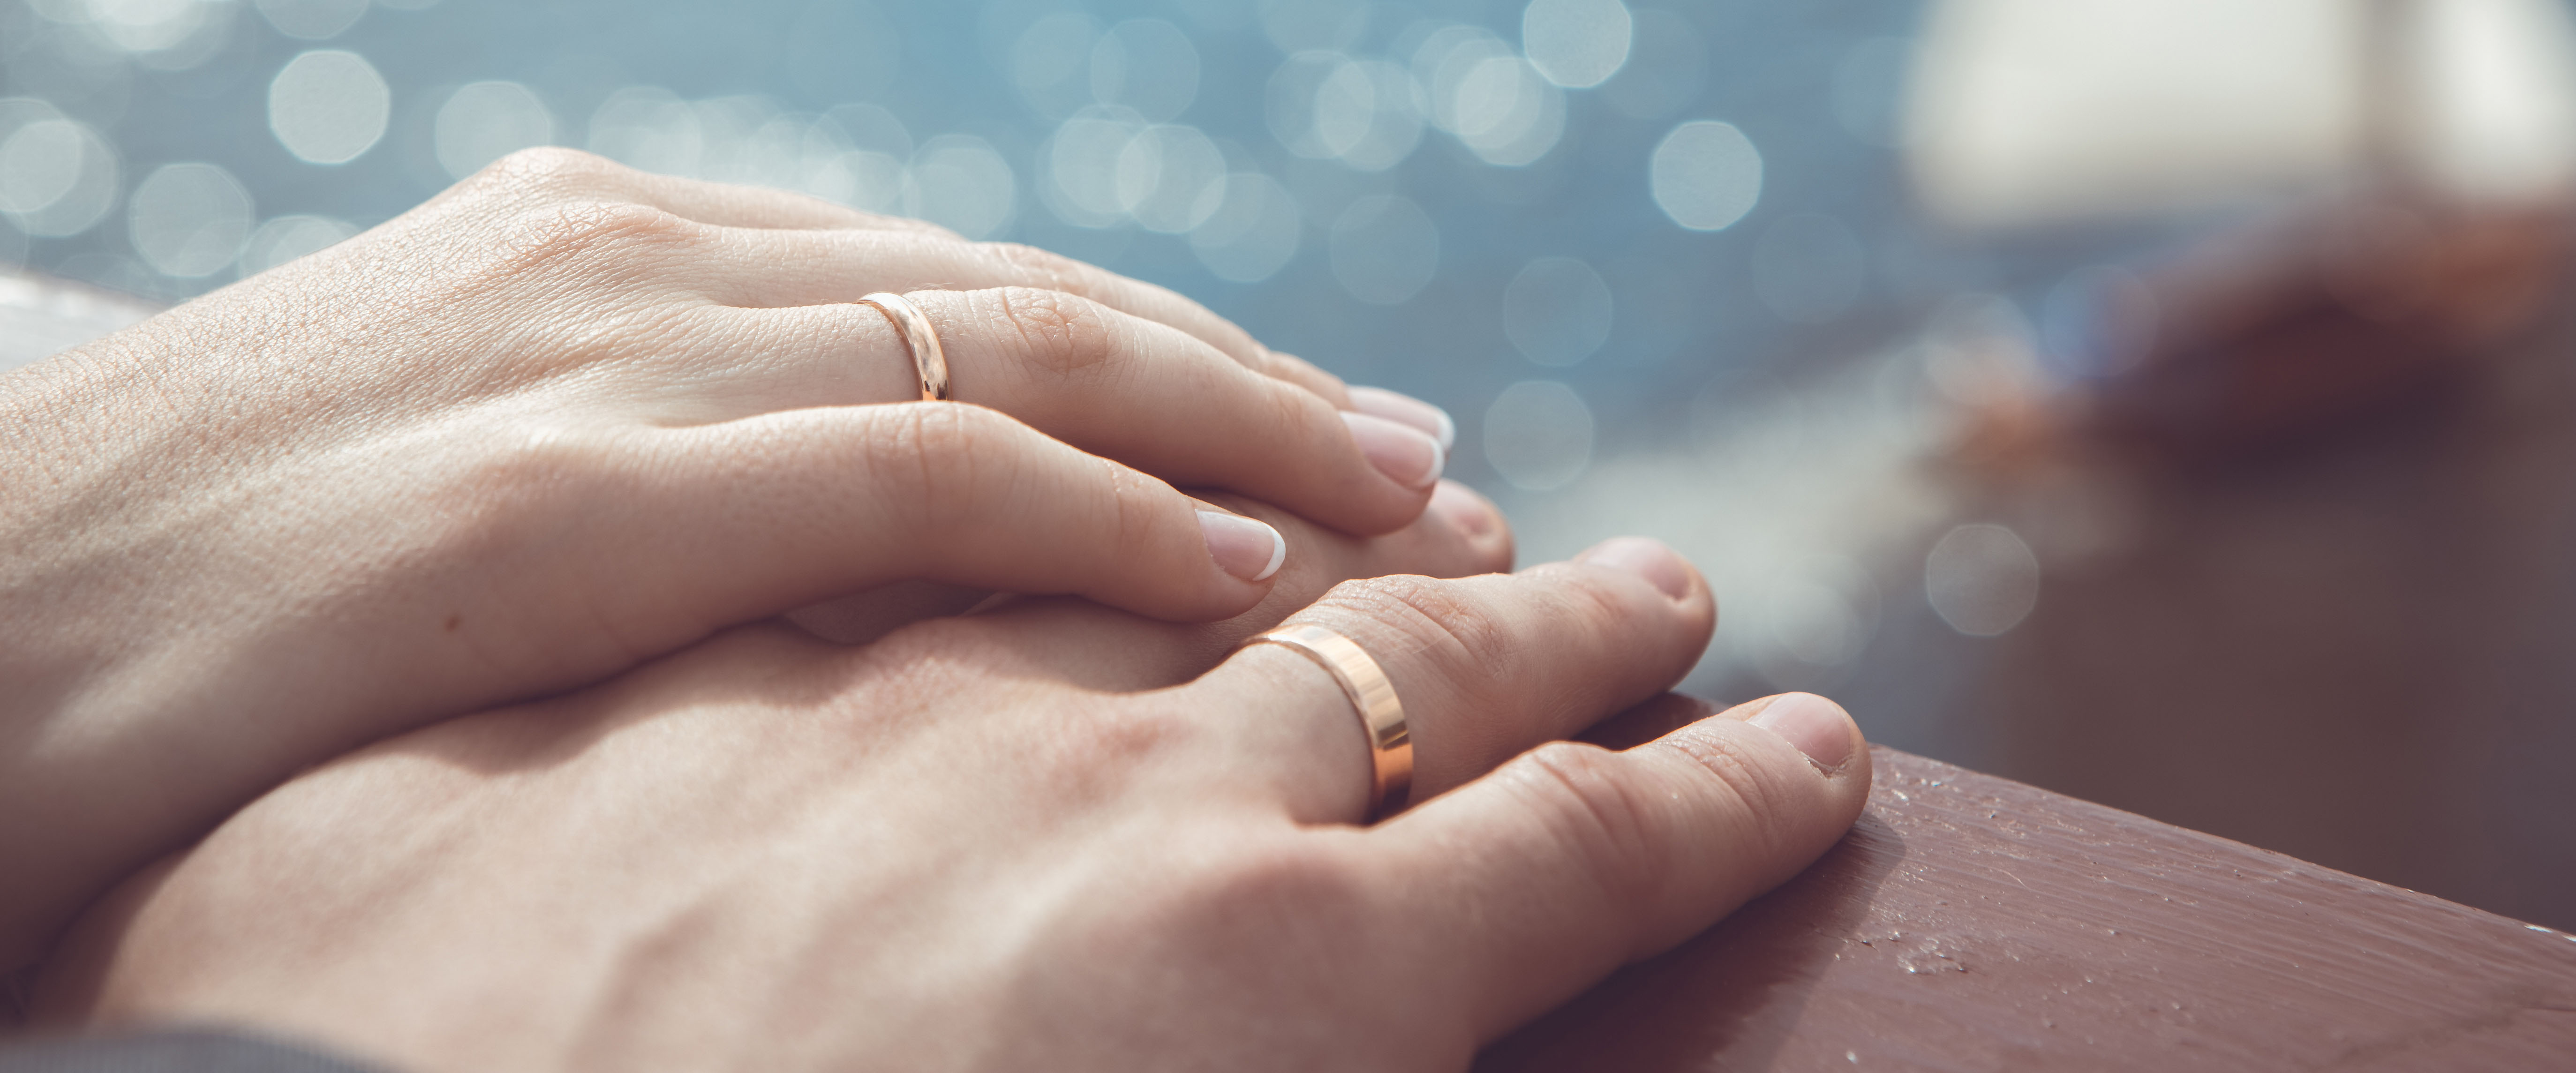 Holding Hands with wedding rings on the background of sea and sun – shutterstock_167534945 HERO